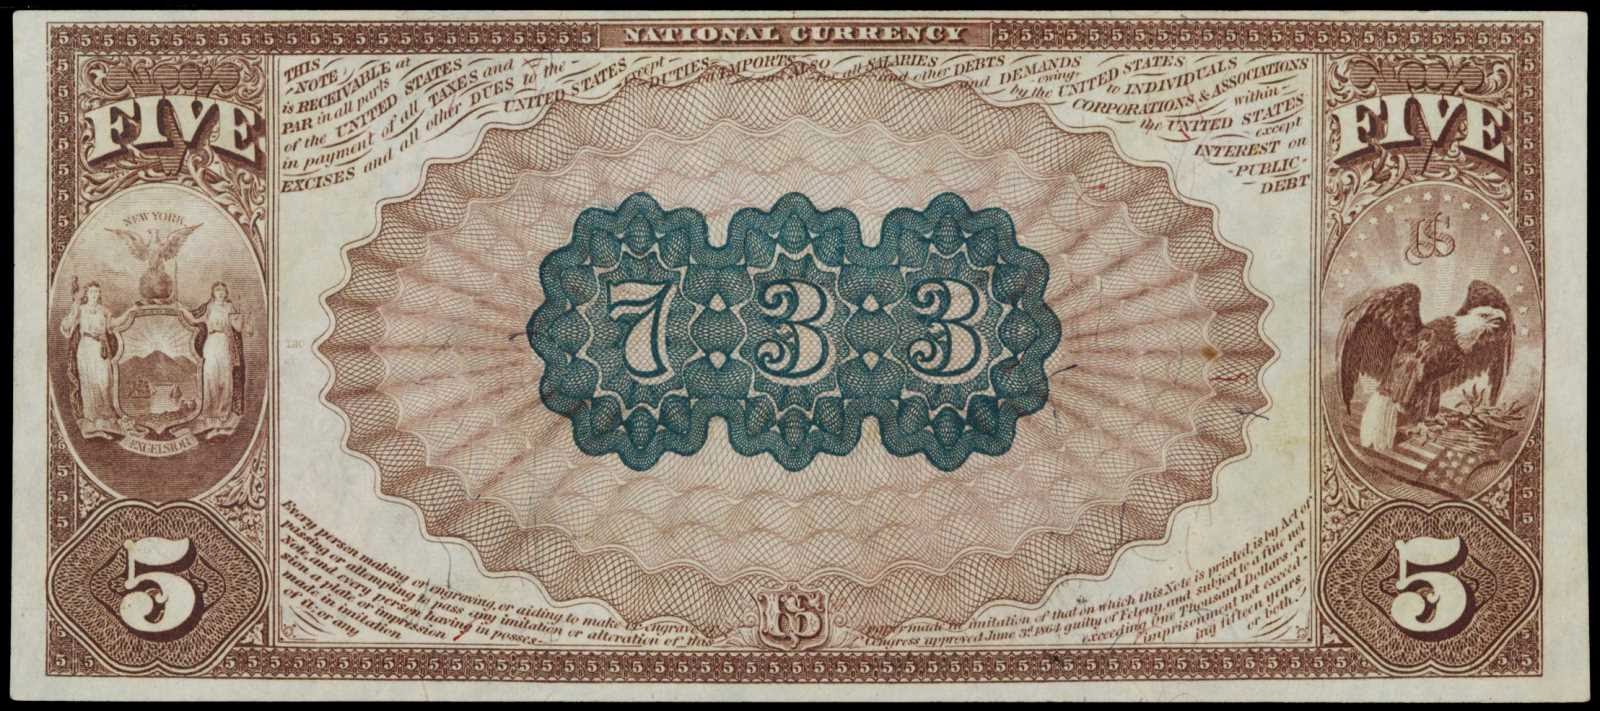 1882 Five Dollar bill National Currency Brown Back